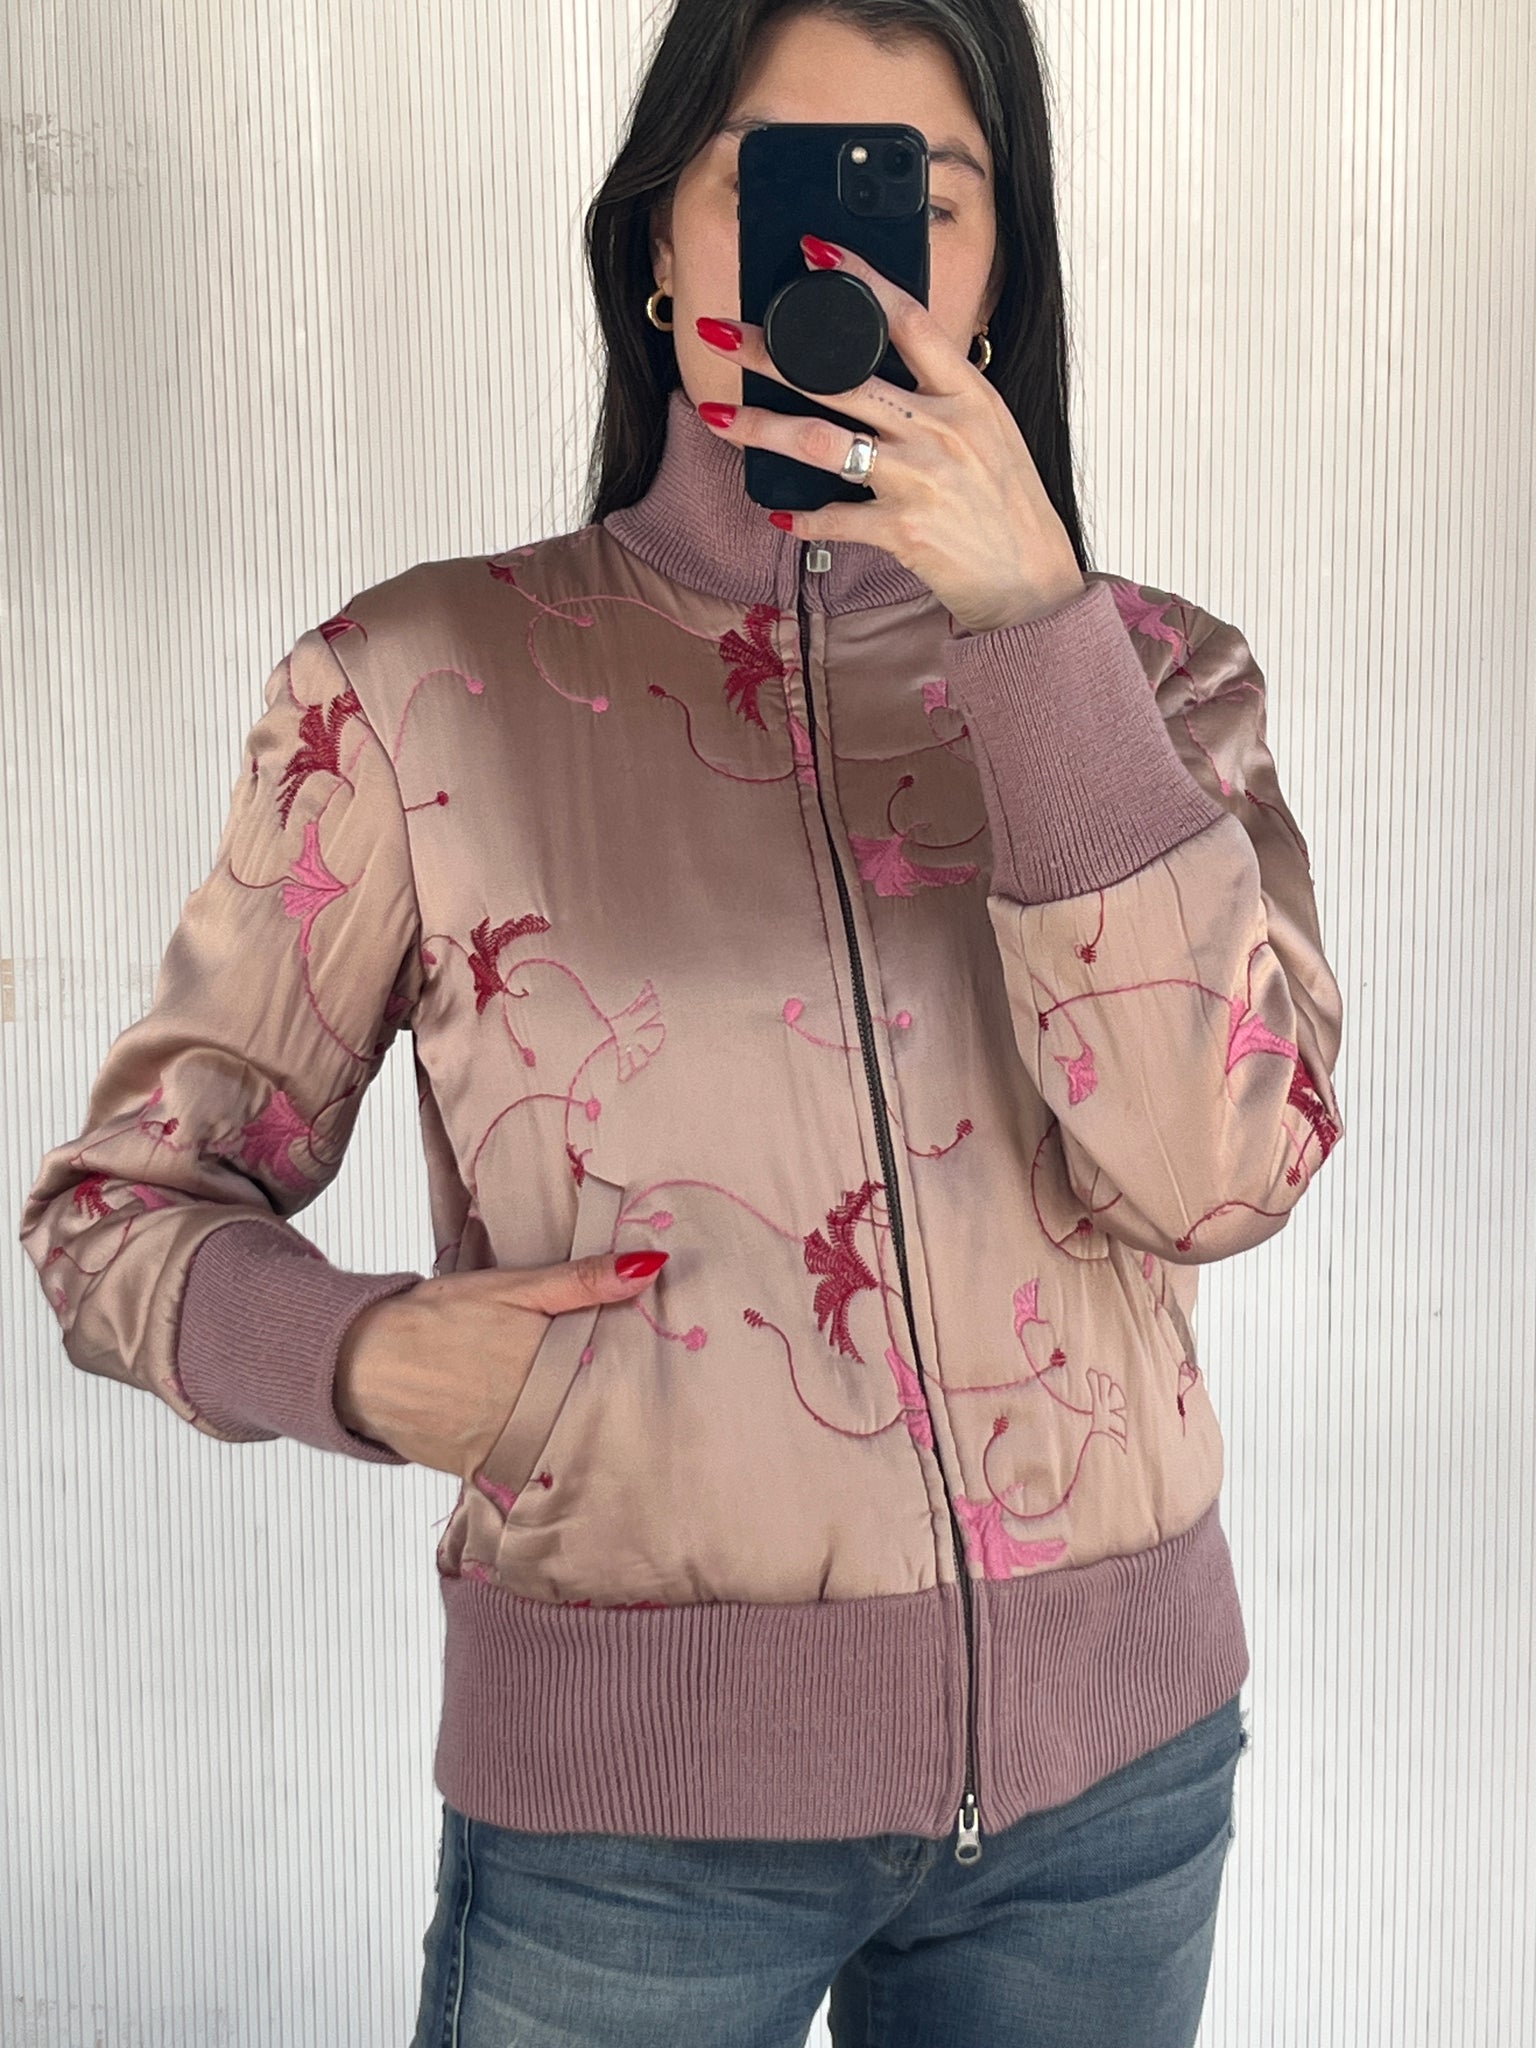 Guess silk embroidered bomber